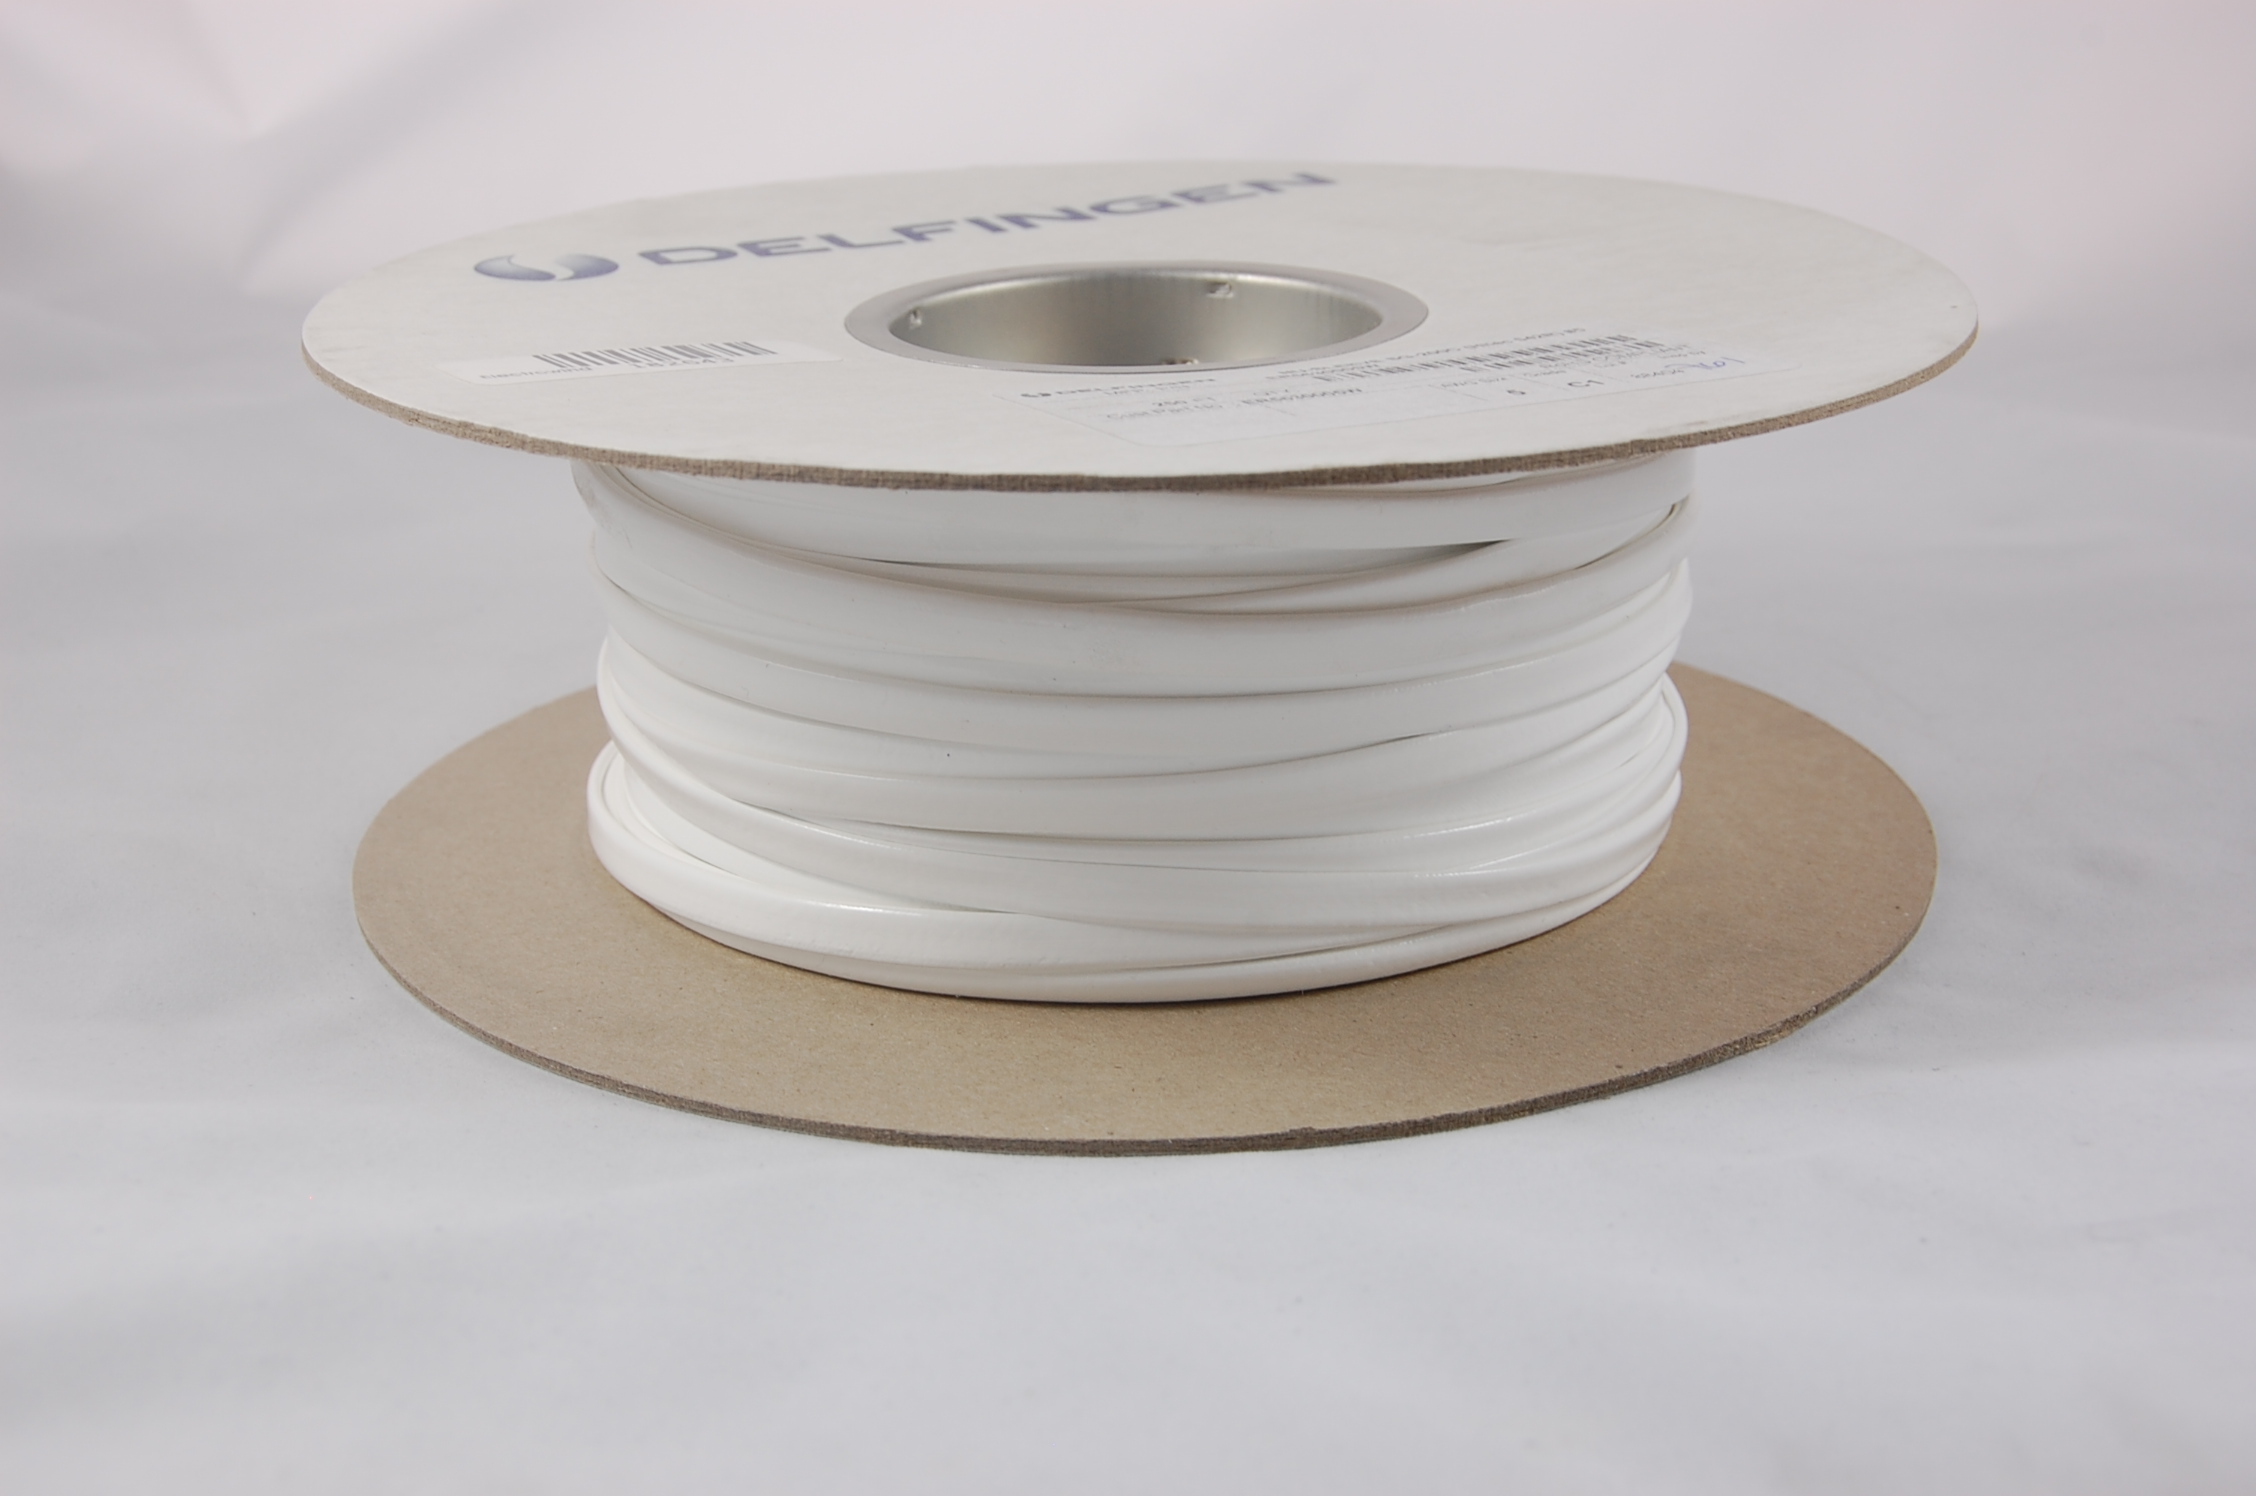 1 INCH AWG NU-SLEEVE SG-200 A (7000V) Silicone Rubber Coated Braided Fiberglass Sleeving (547F) 200°C, white, 100 FT per spool